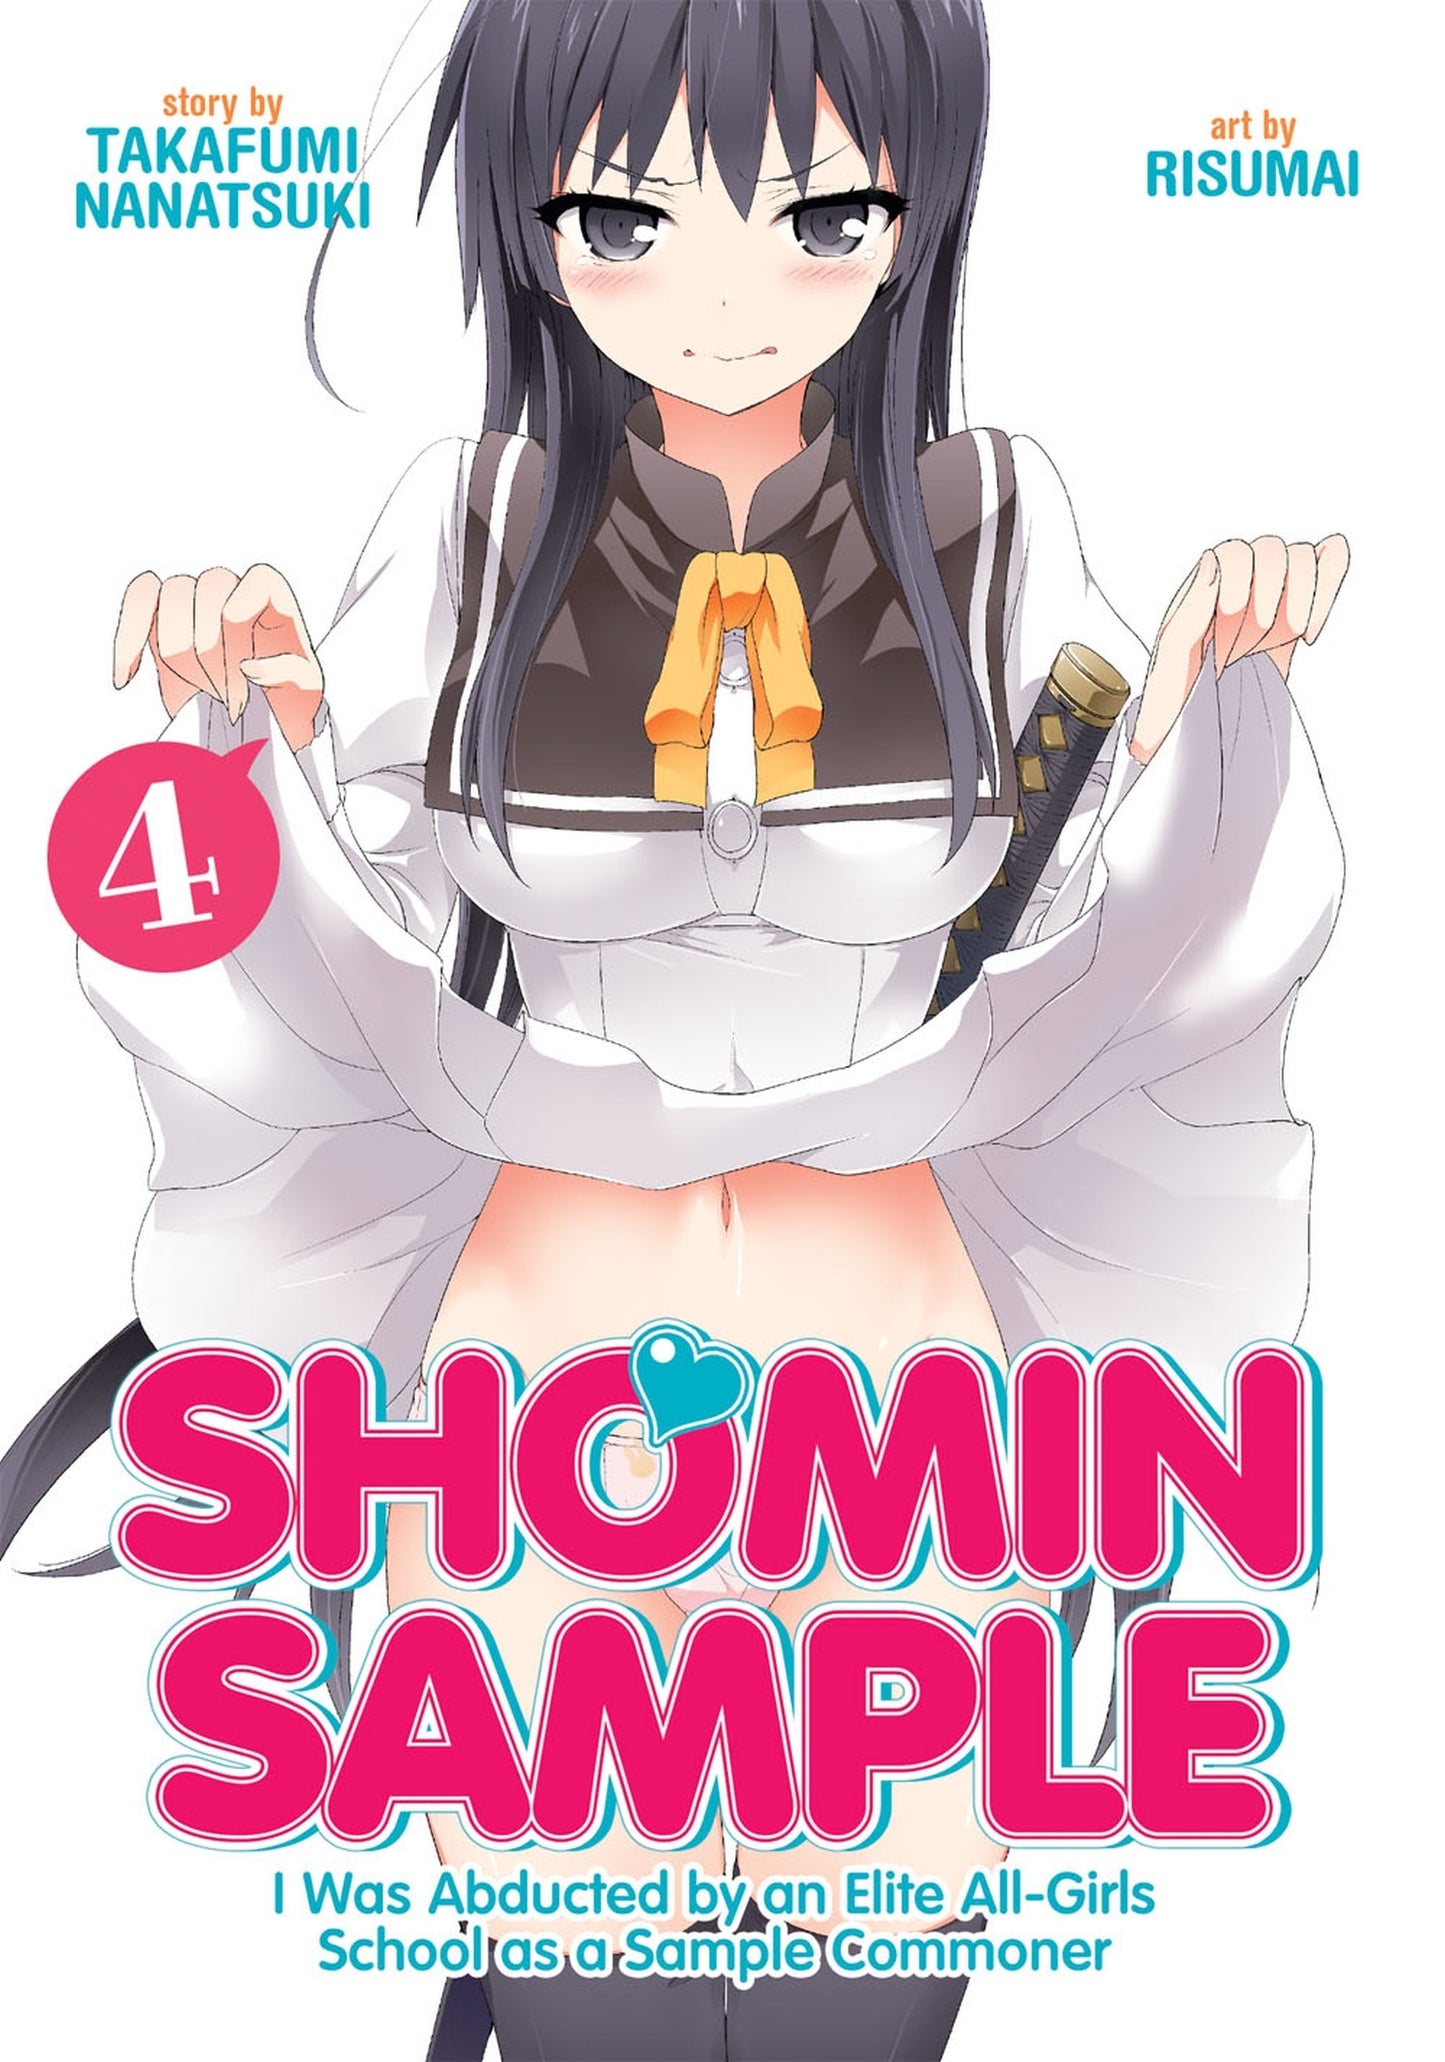 Shomin Sample : I Was Abducted by an Elite All-Girls School as a Sample Commoner Vol. 4 - Manga Warehouse